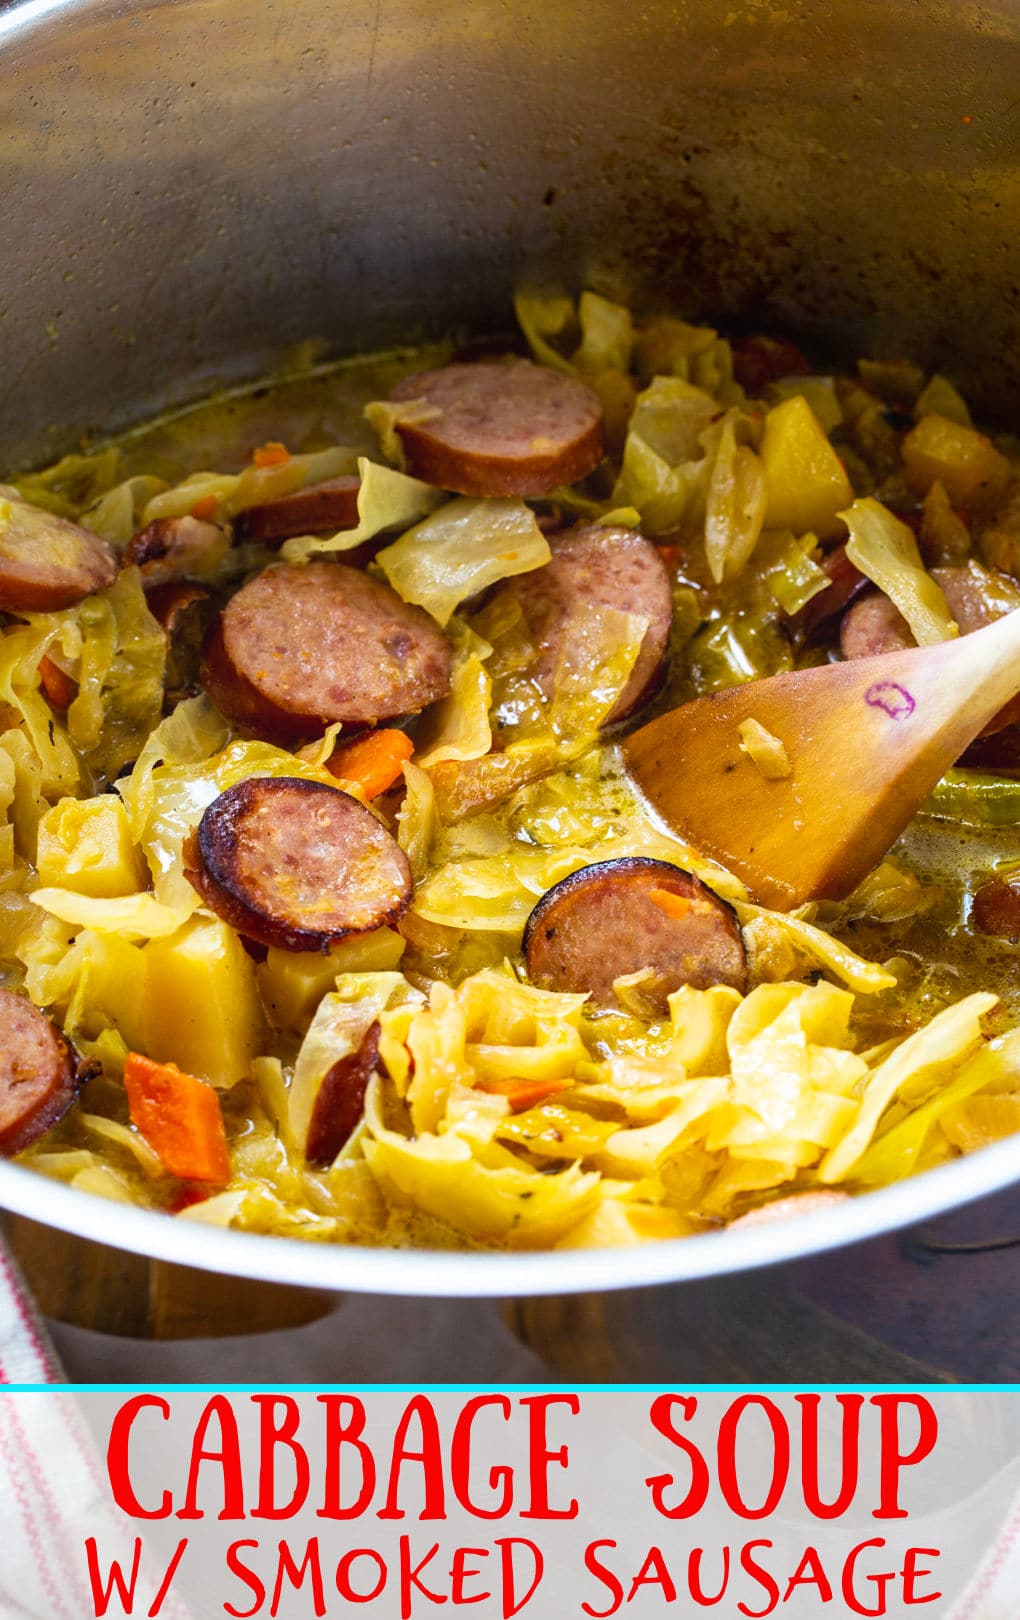 Wooden spoon scooping Cabbage Soup with Smoked Sausage.